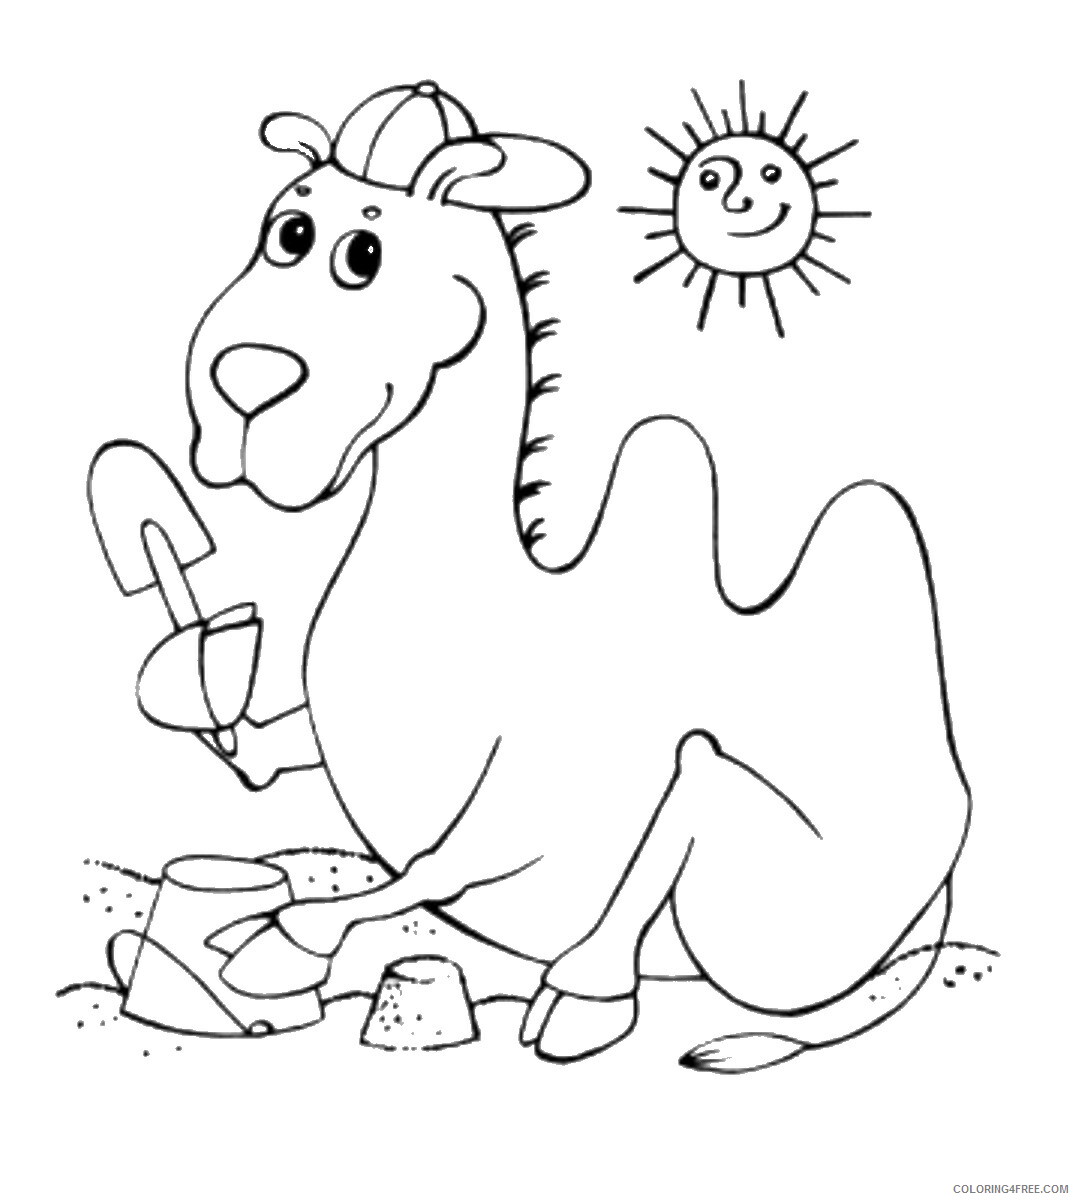 Camel Coloring Pages Animal Printable Sheets camel_cl_07 2021 0728 Coloring4free